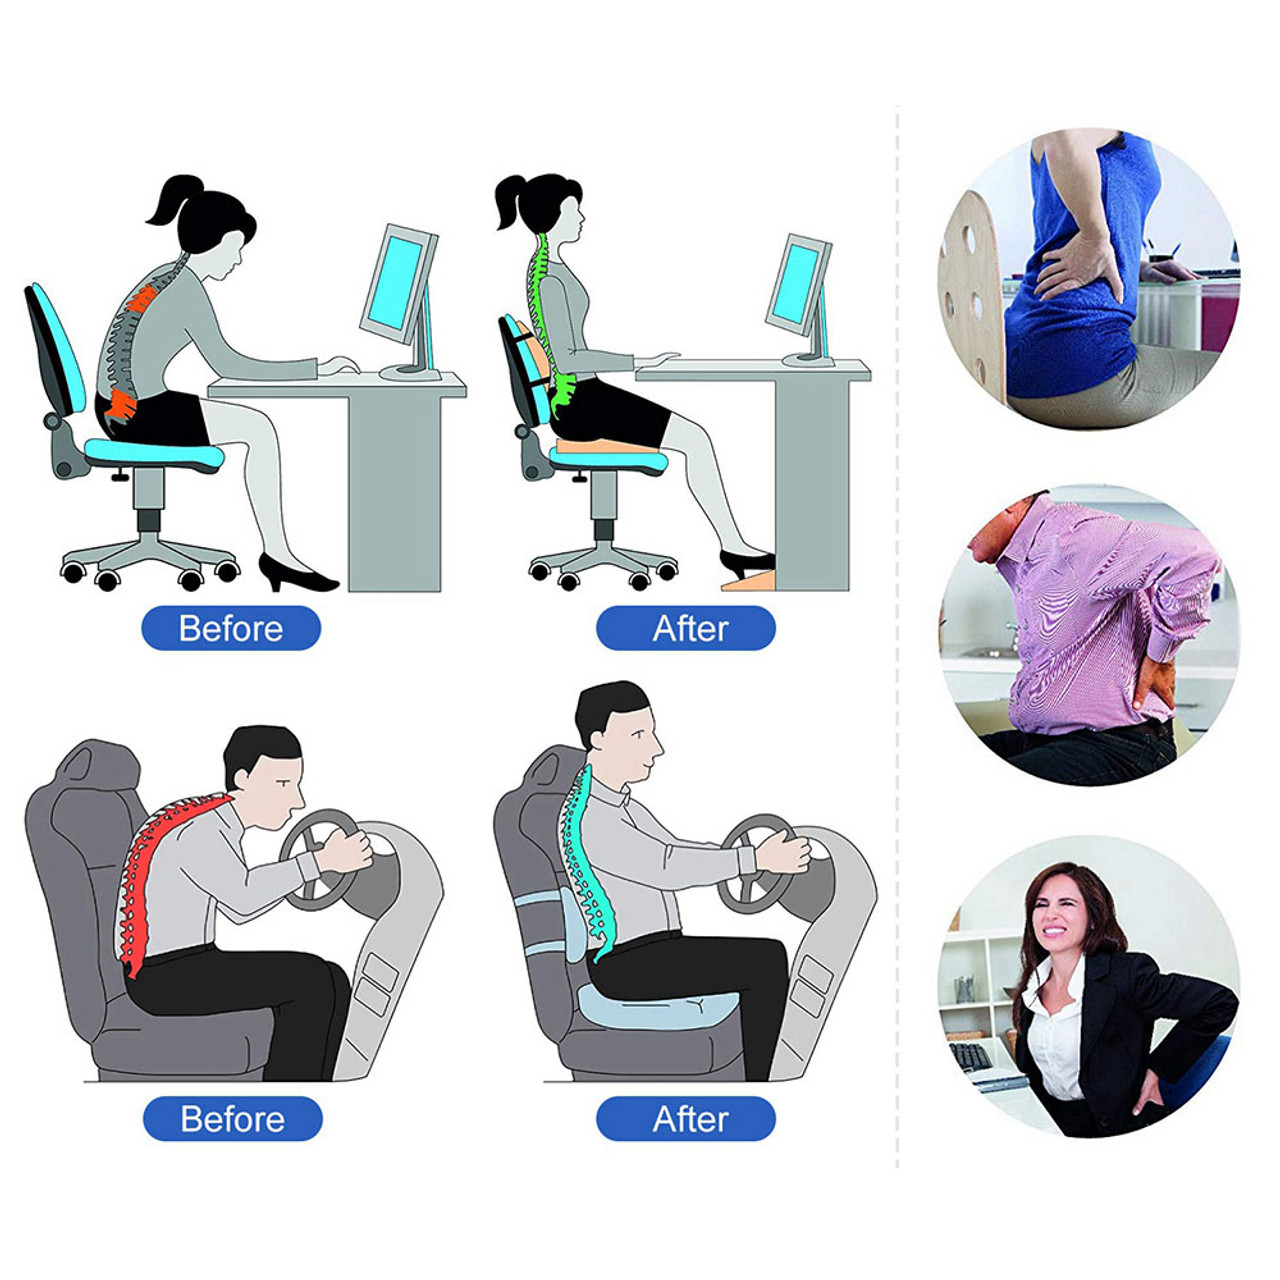 NewHome™ Memory Foam Seat Cushion product image